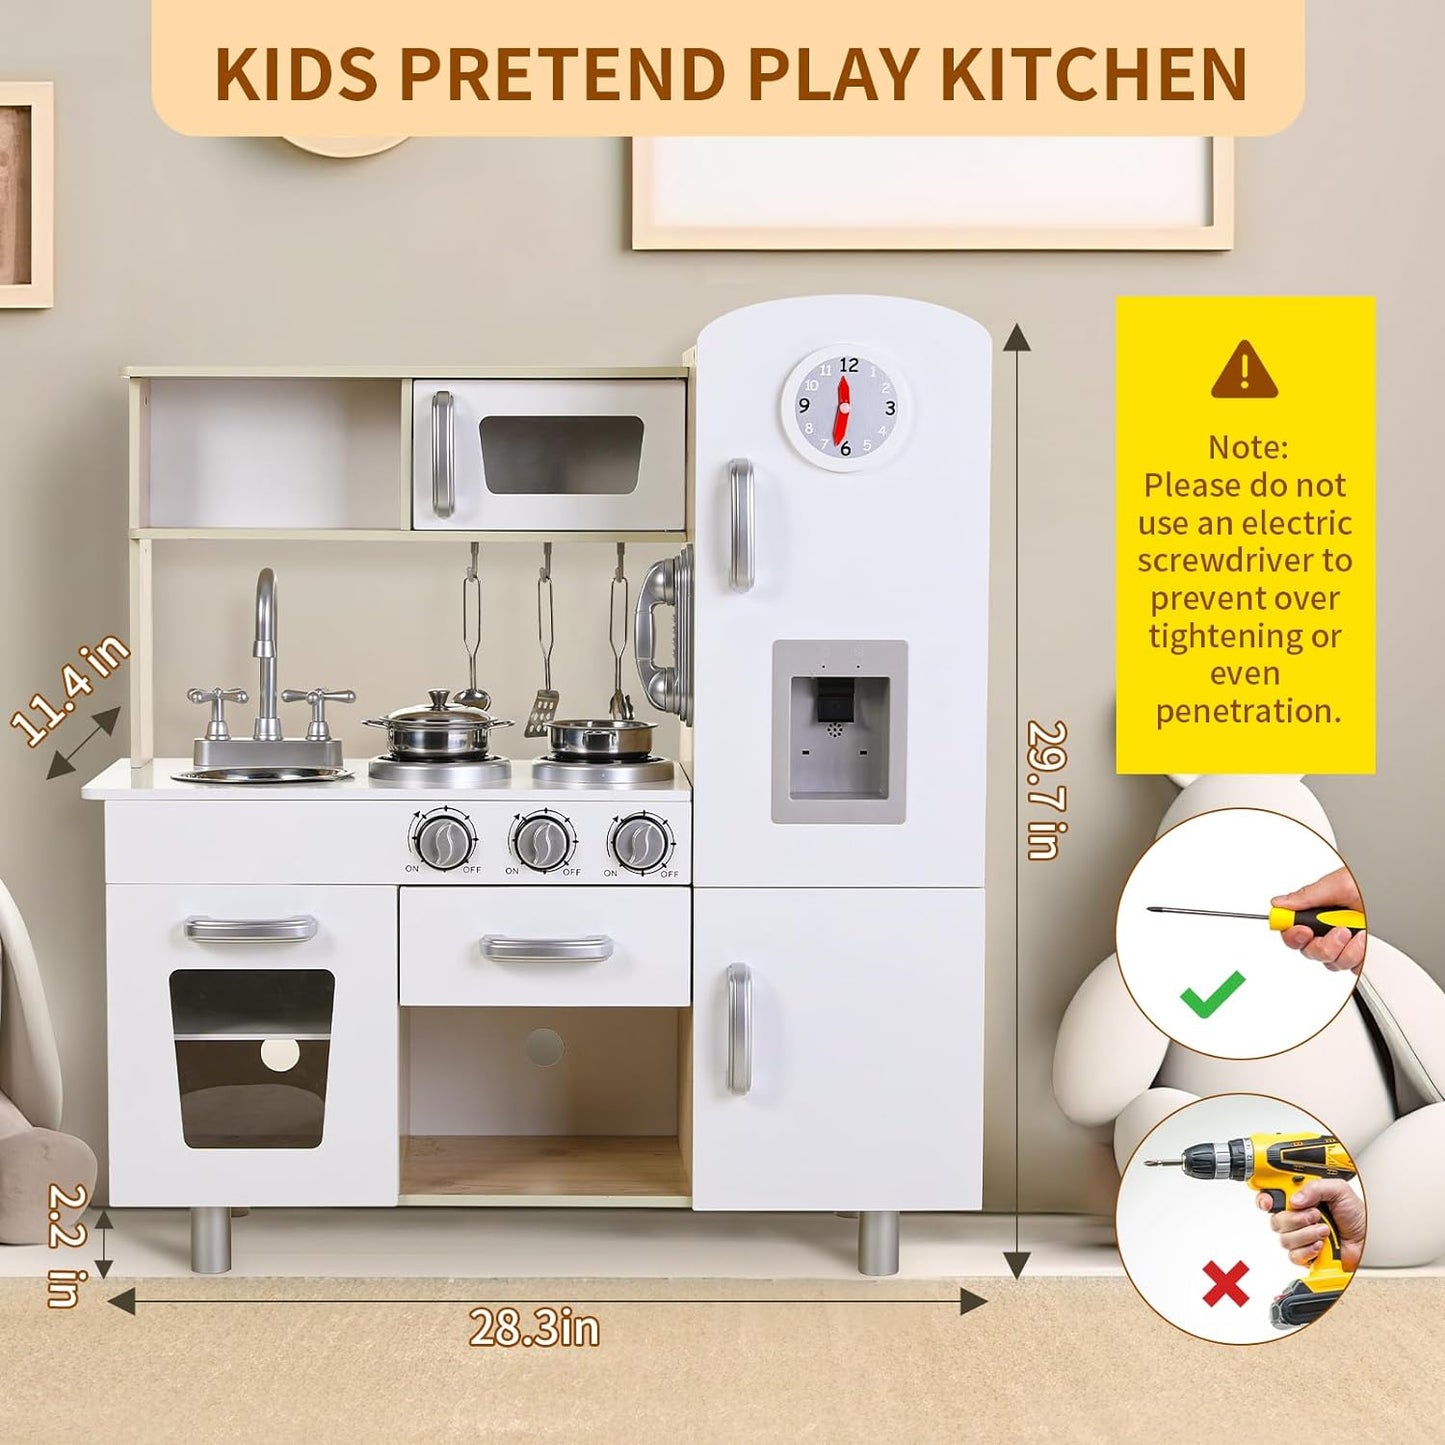 Arlopu Pretend Play Kitchen Wooden Toy Kitchen Playset for Kids with Telephone, Utensils, Oven, Microwave